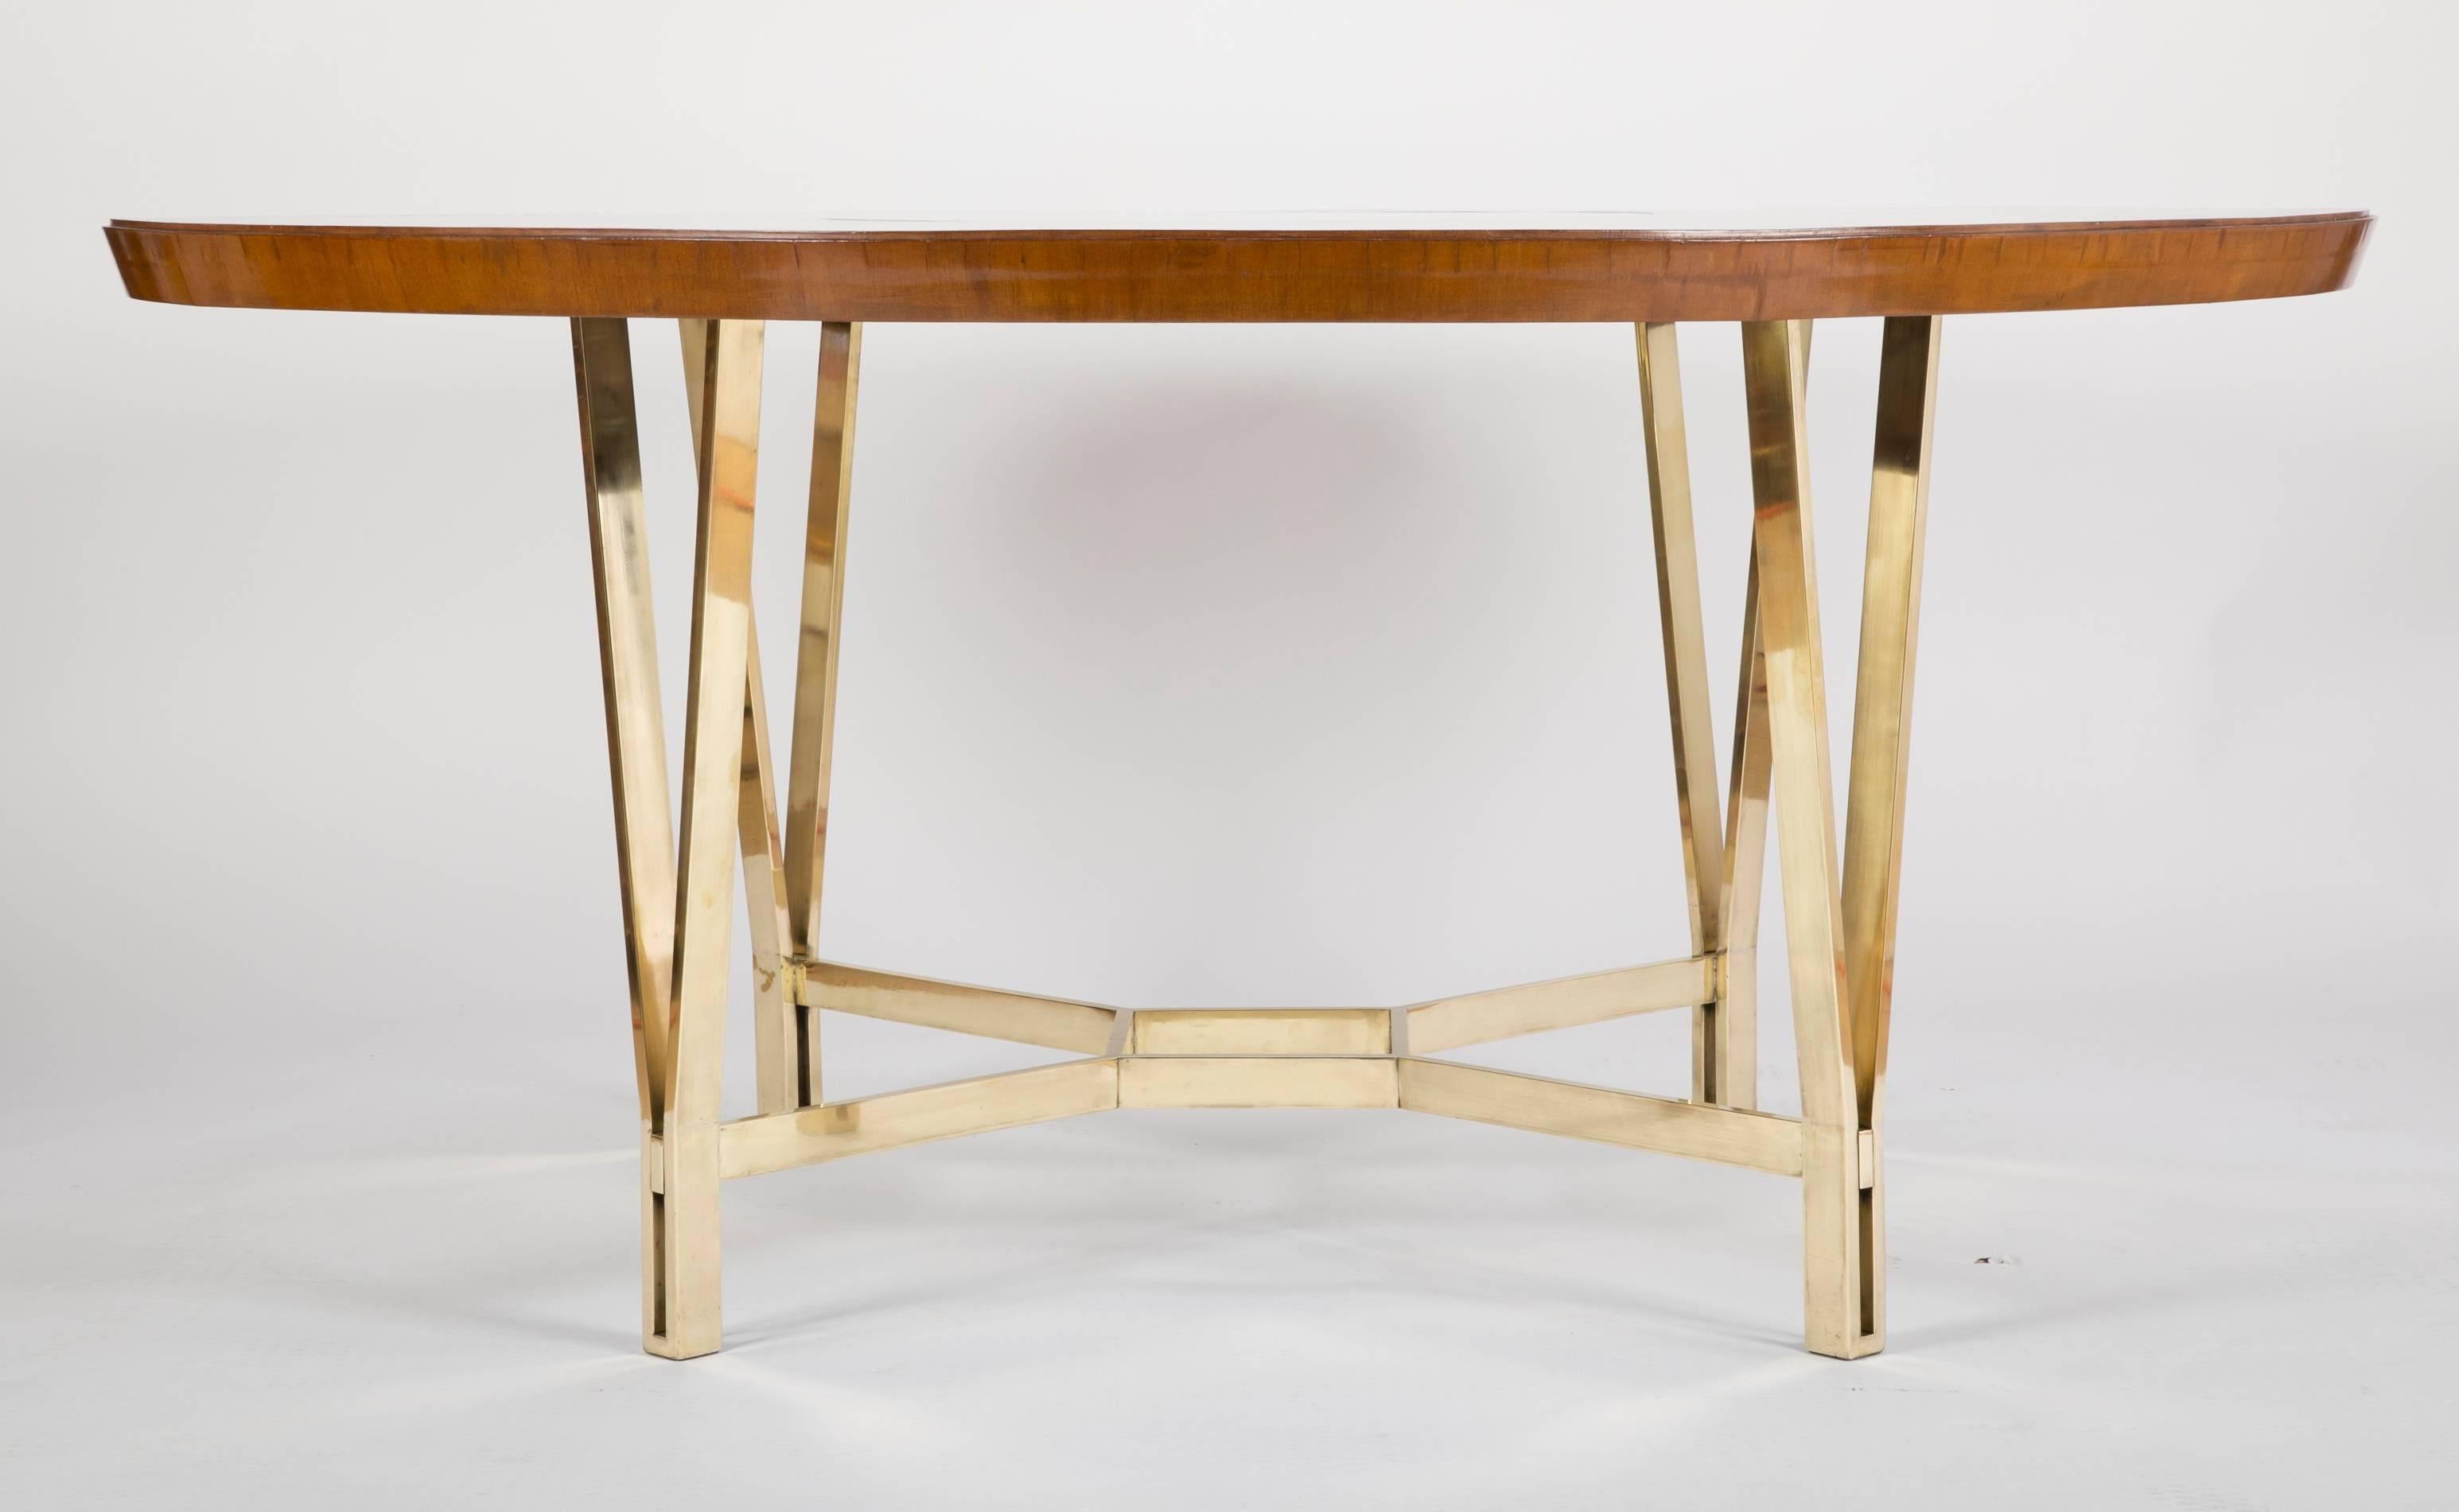 A Sapele wood center table with central glass filled cut-out. The large-scale table rests on a polished bronze base.